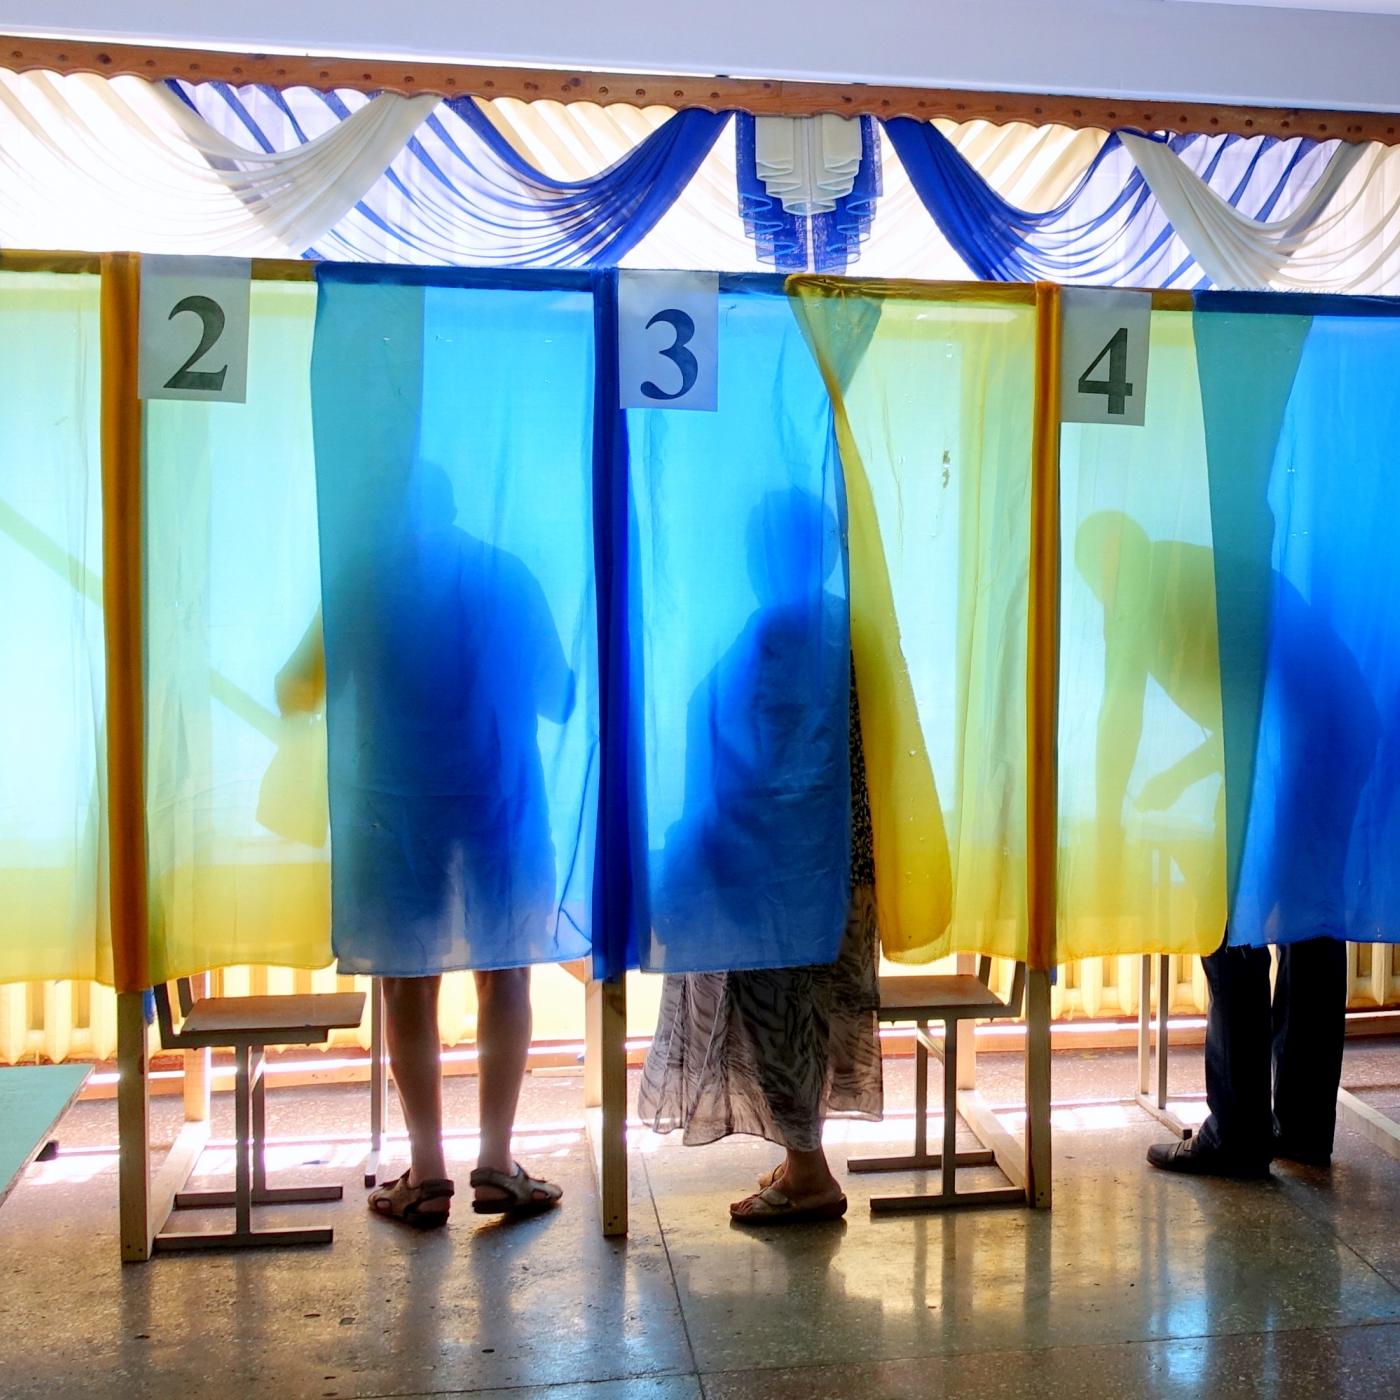 Voters stand behind blue and yellow curtains in poll booths.